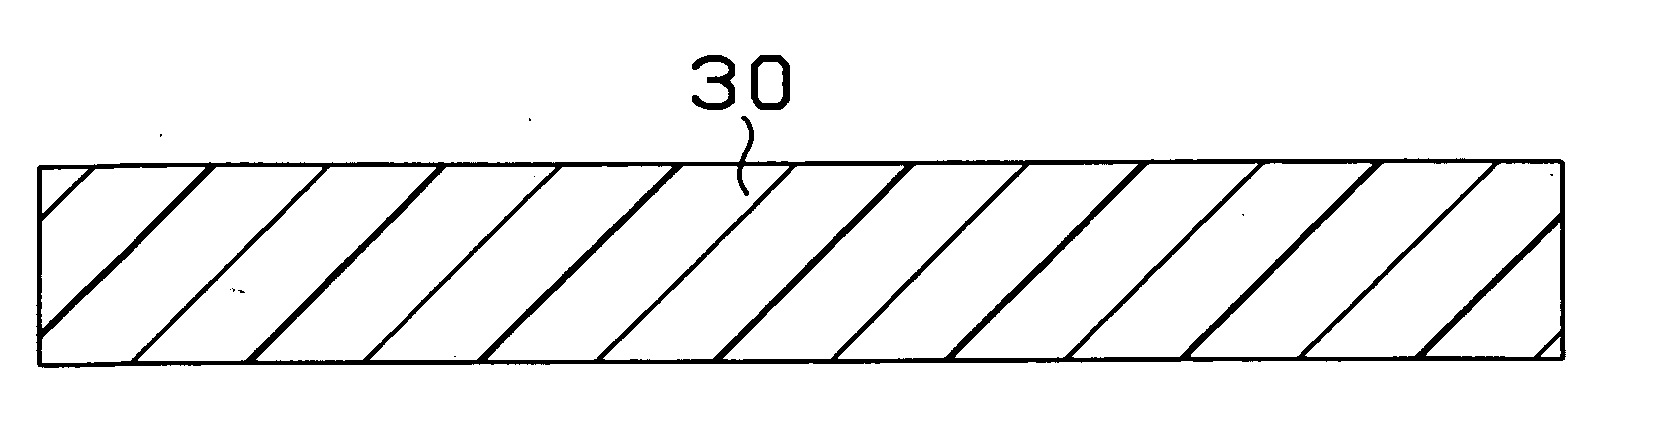 Printed circuit board and method for manufacturing printed circuit board